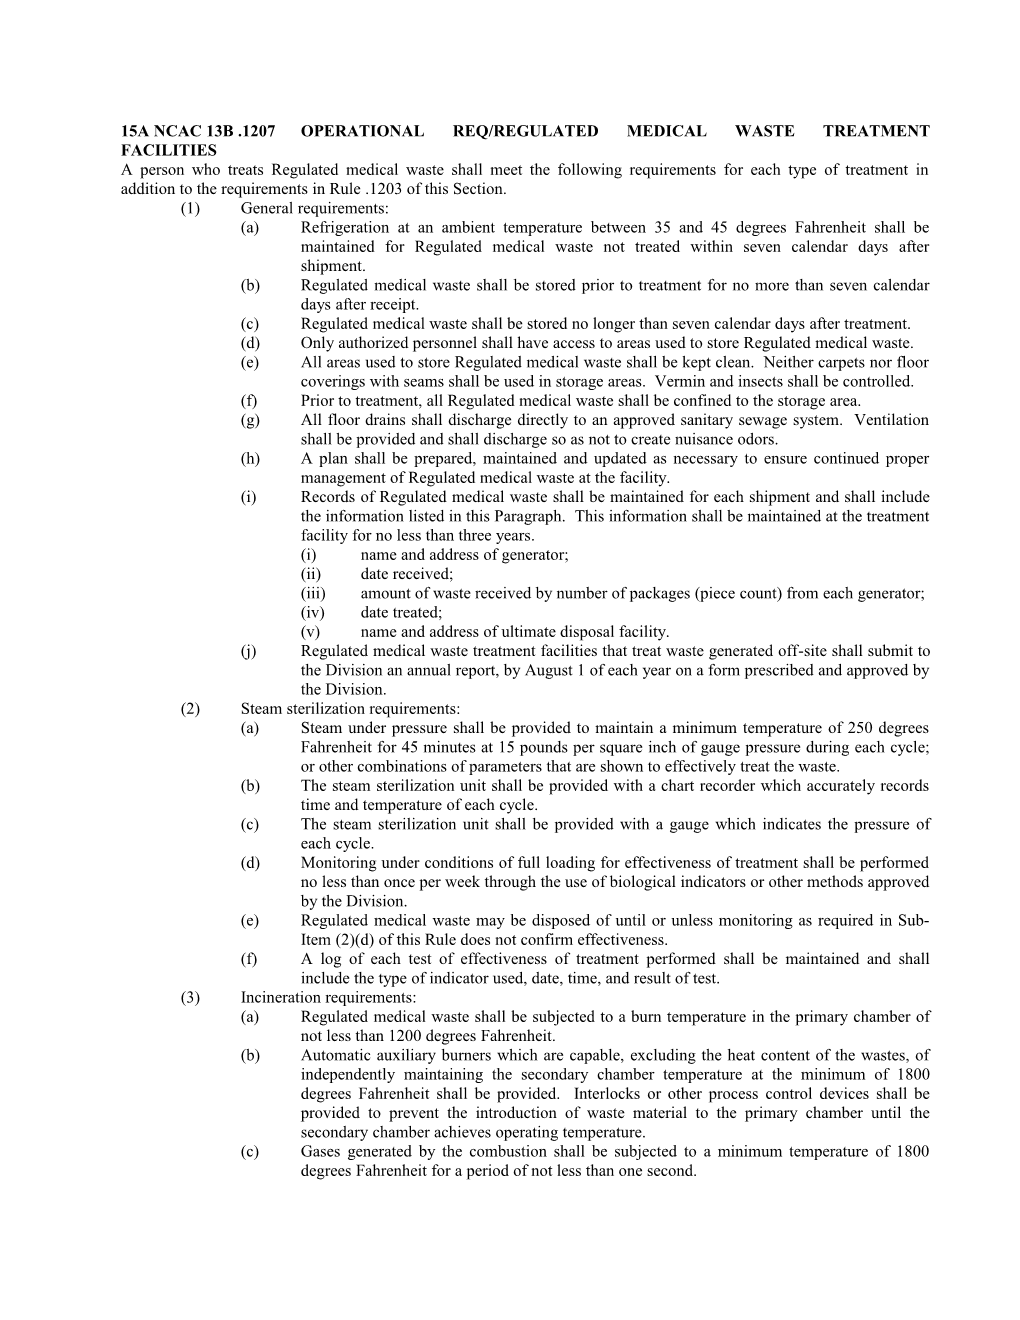 15A Ncac 13B .1207Operational Req/Regulated Medical Waste Treatment Facilities